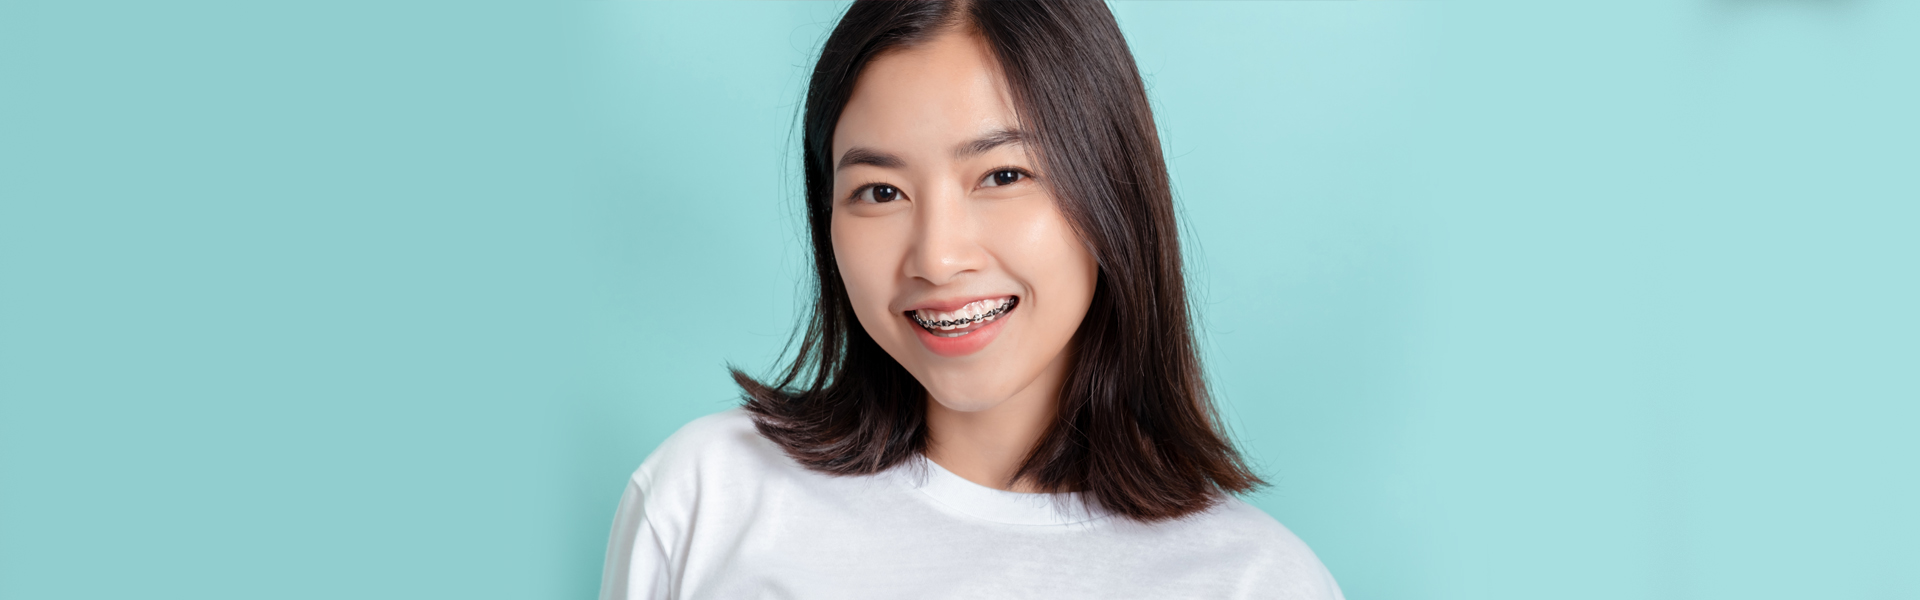 Everything You Should Know About Traditional Braces